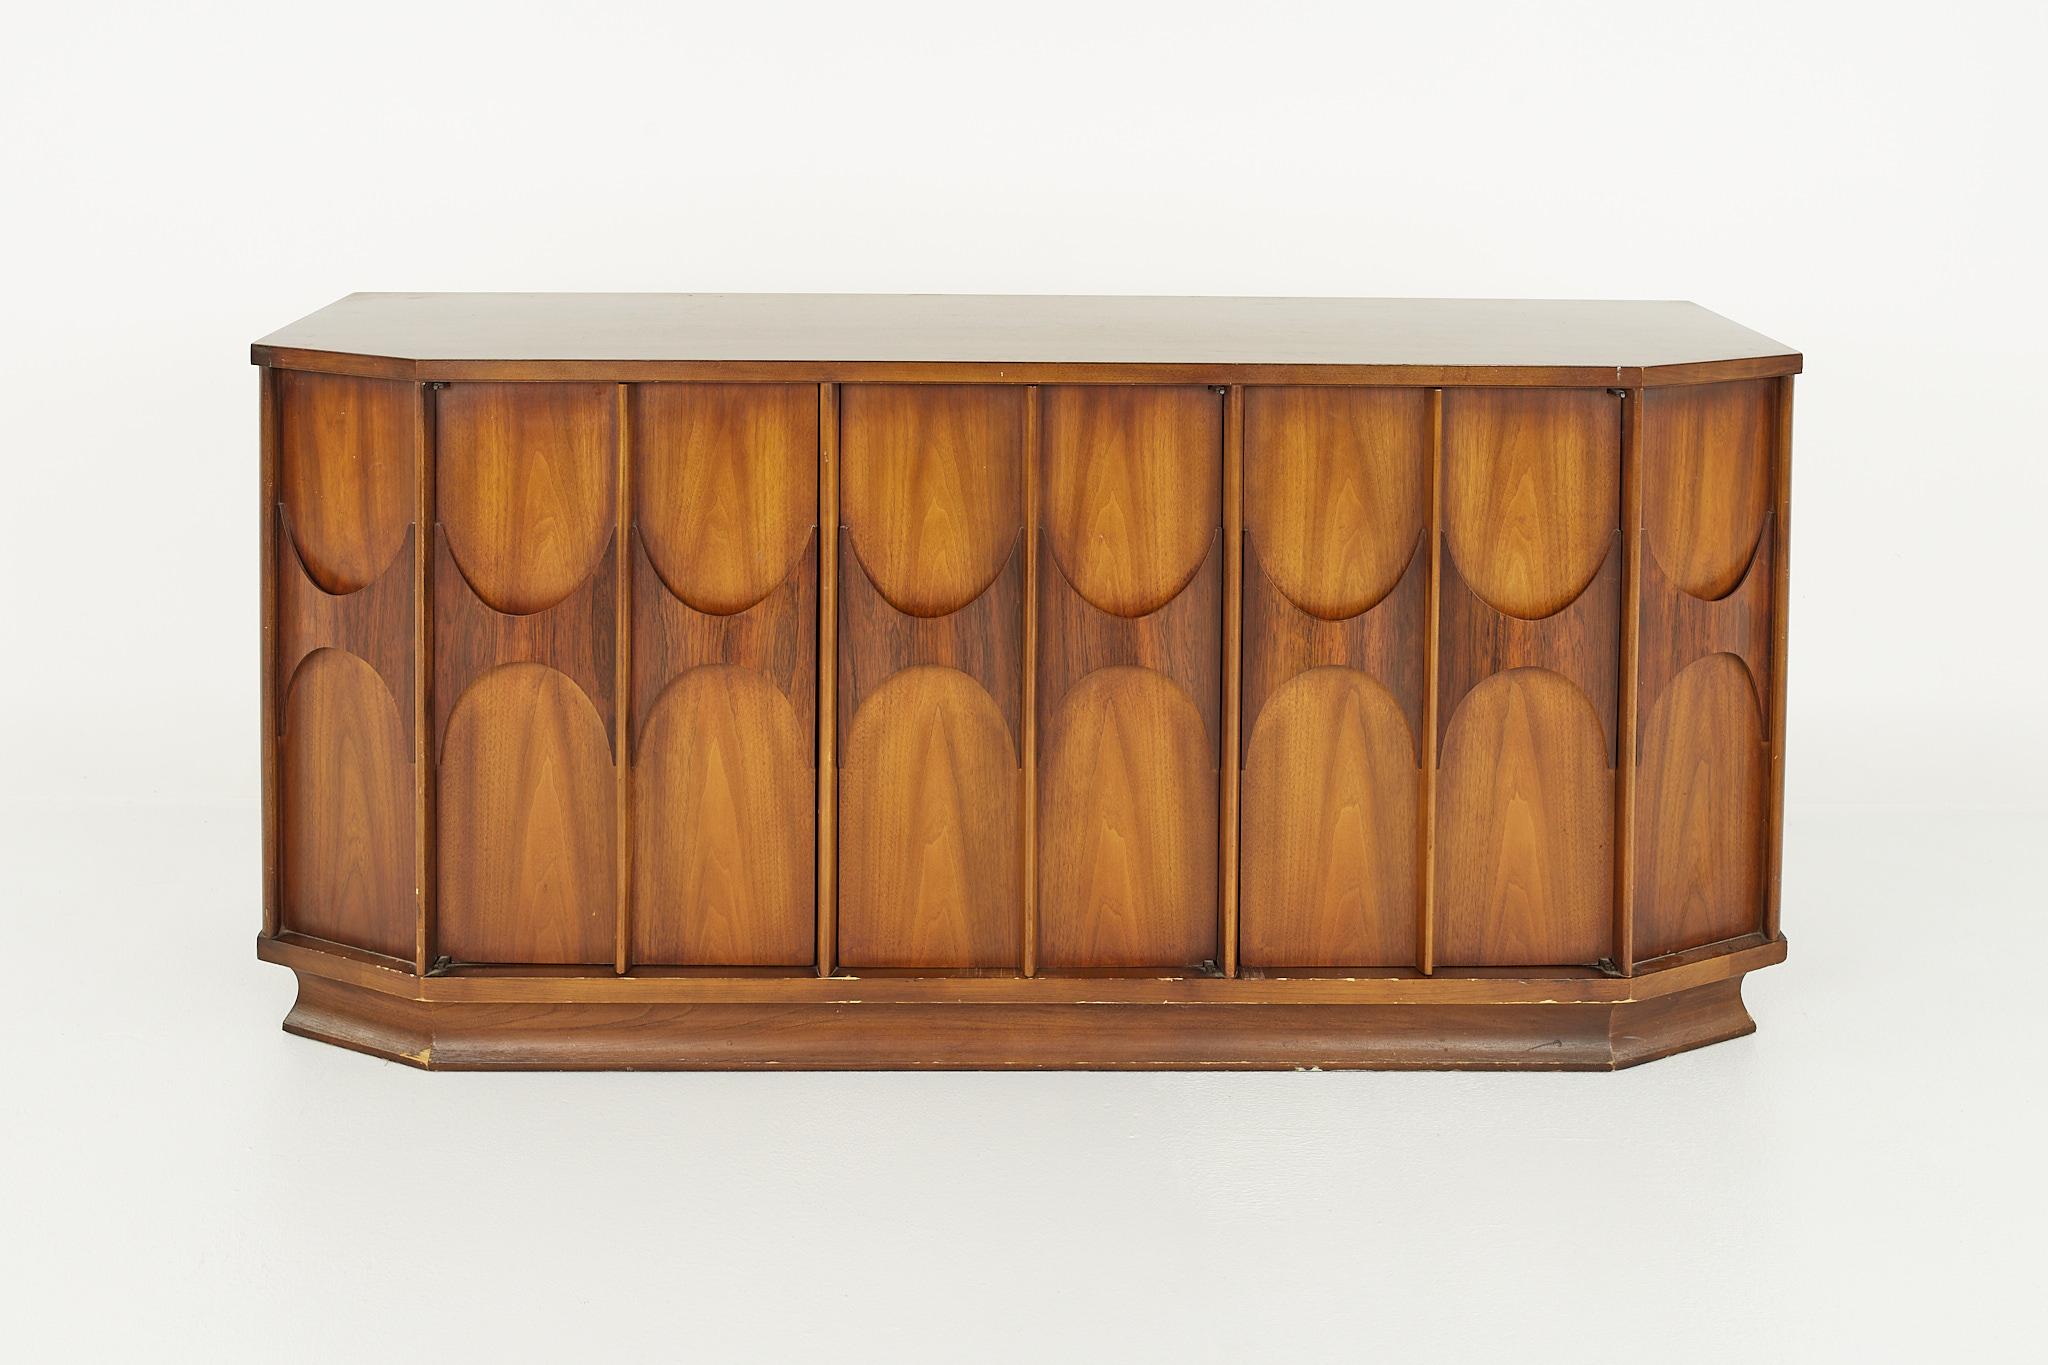 Kent Coffey Perspecta Mid Century Hexagonal Credenza

Credenza measures: 66 wide x 20 deep x 30 inches high

All pieces of furniture can be had in what we call restored vintage condition. That means the piece is restored upon purchase so it’s